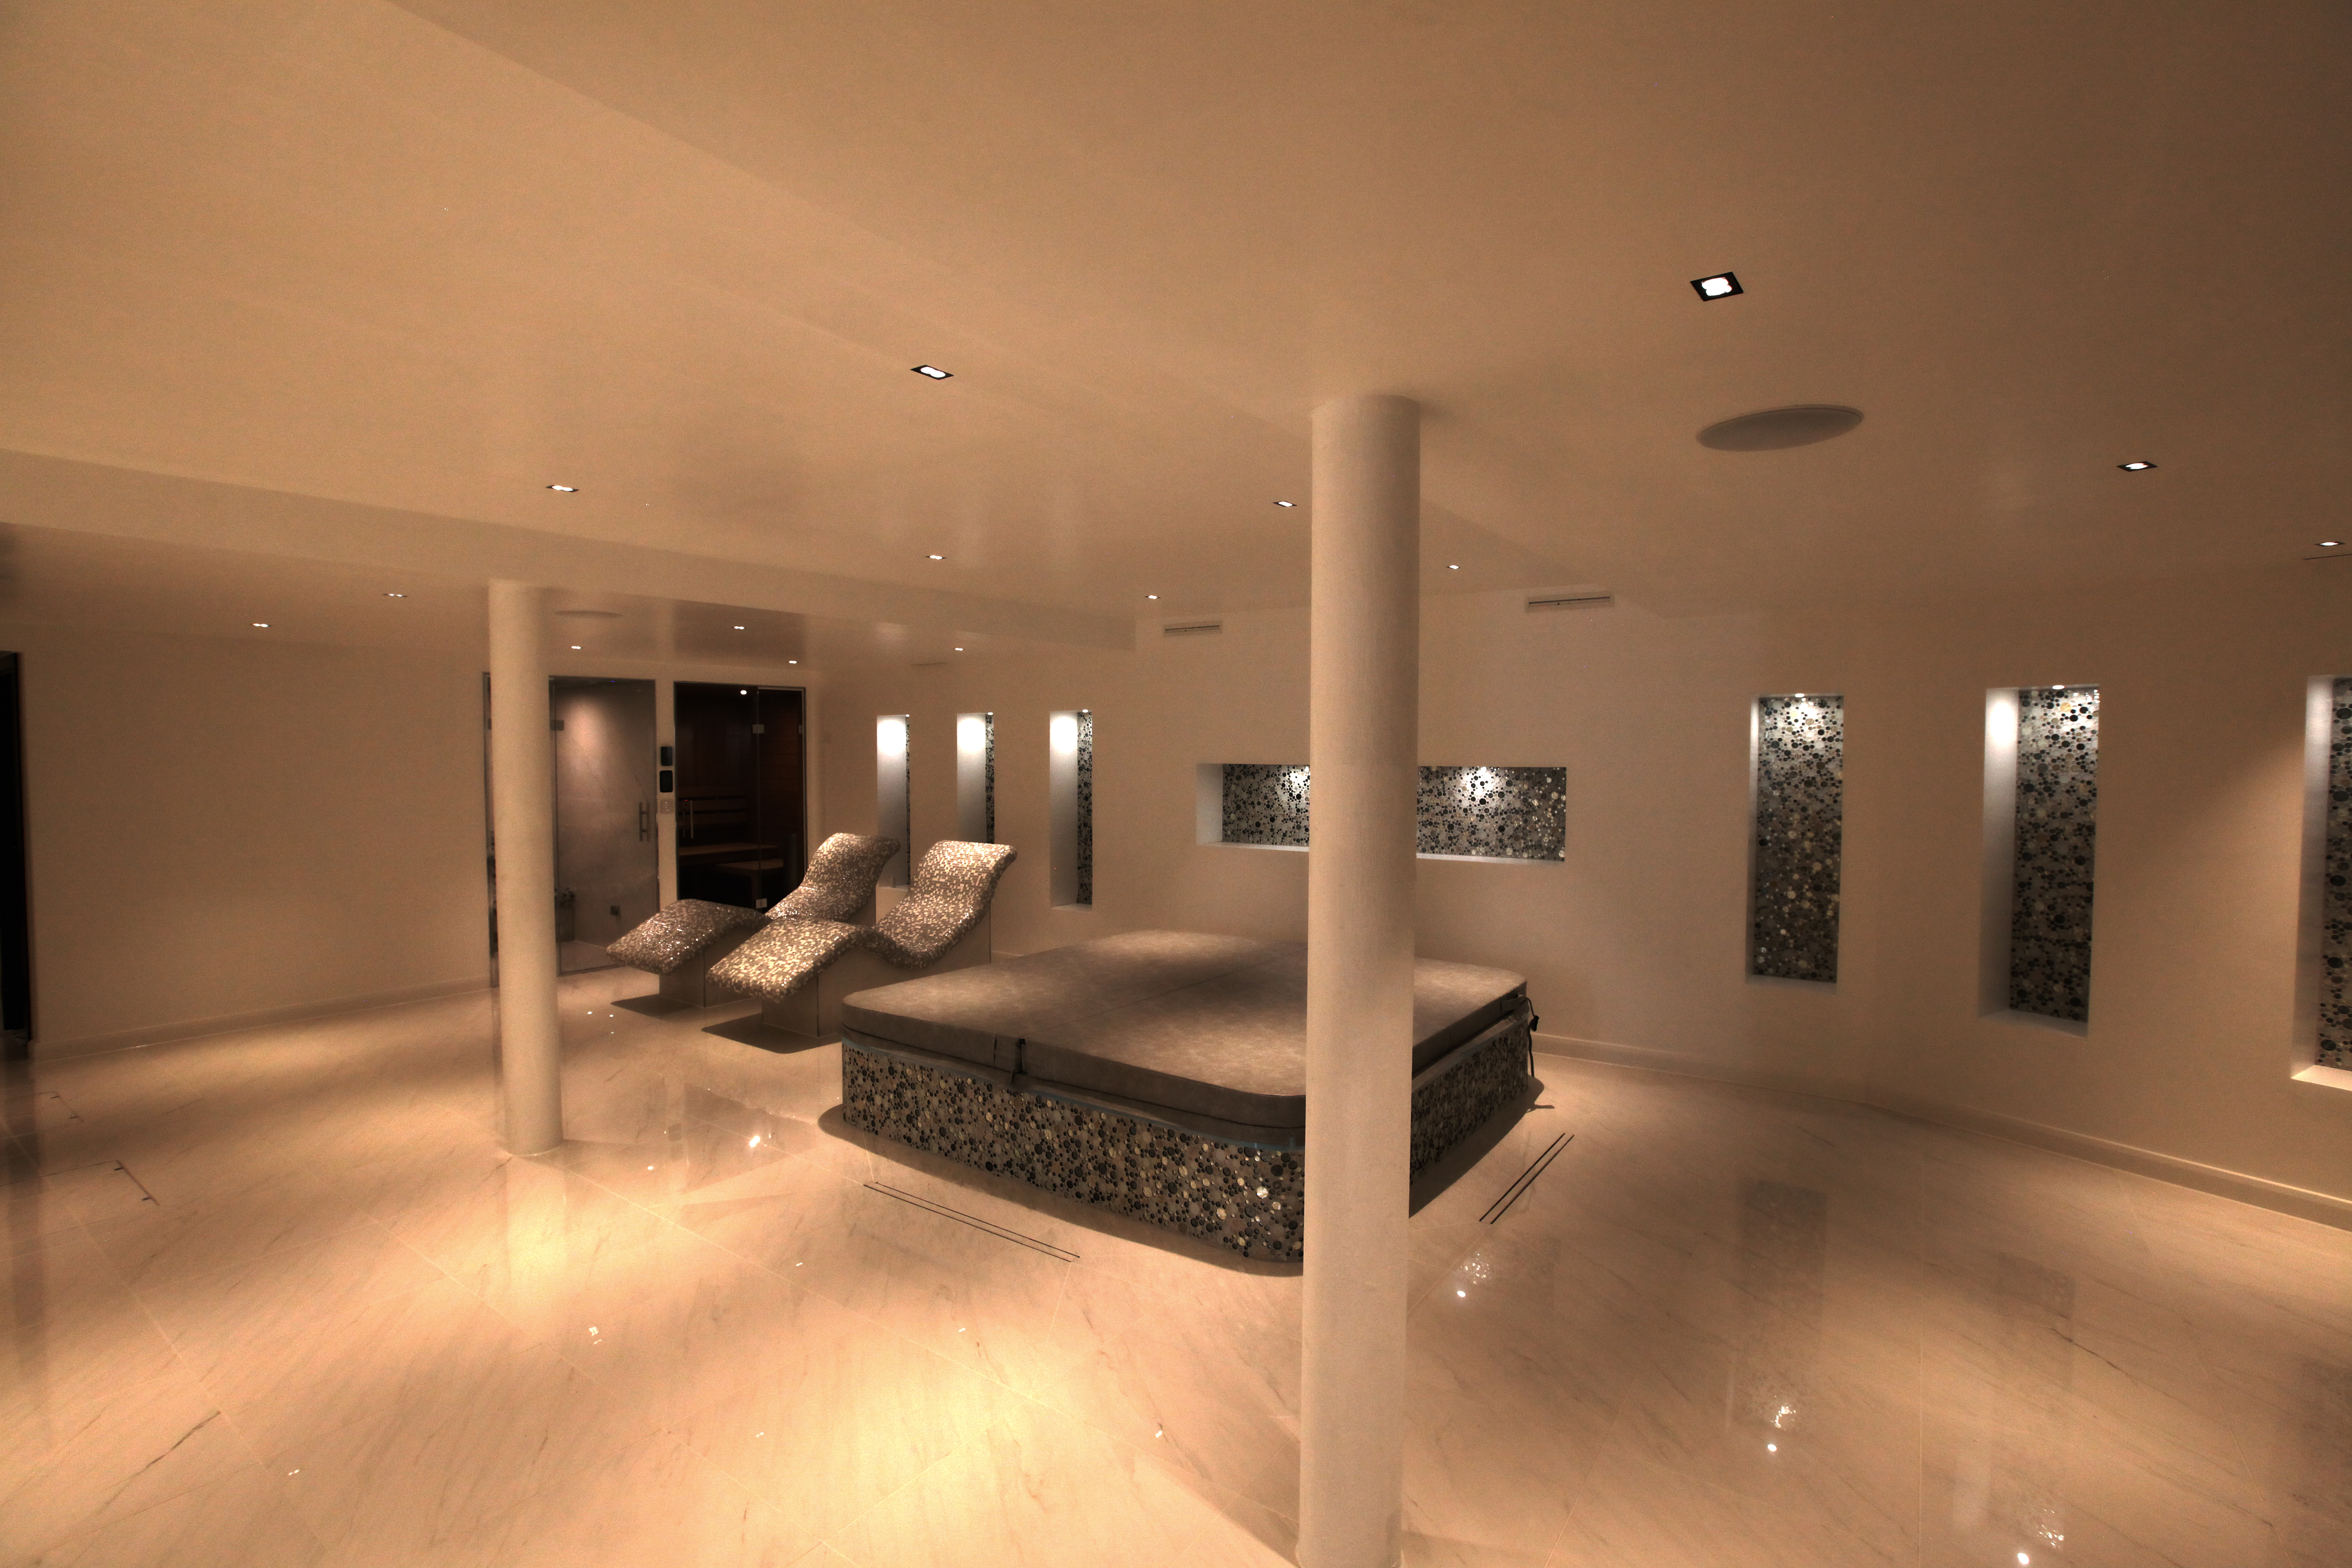 Spa and pool area with in-ceiling speakers and mood lighting.